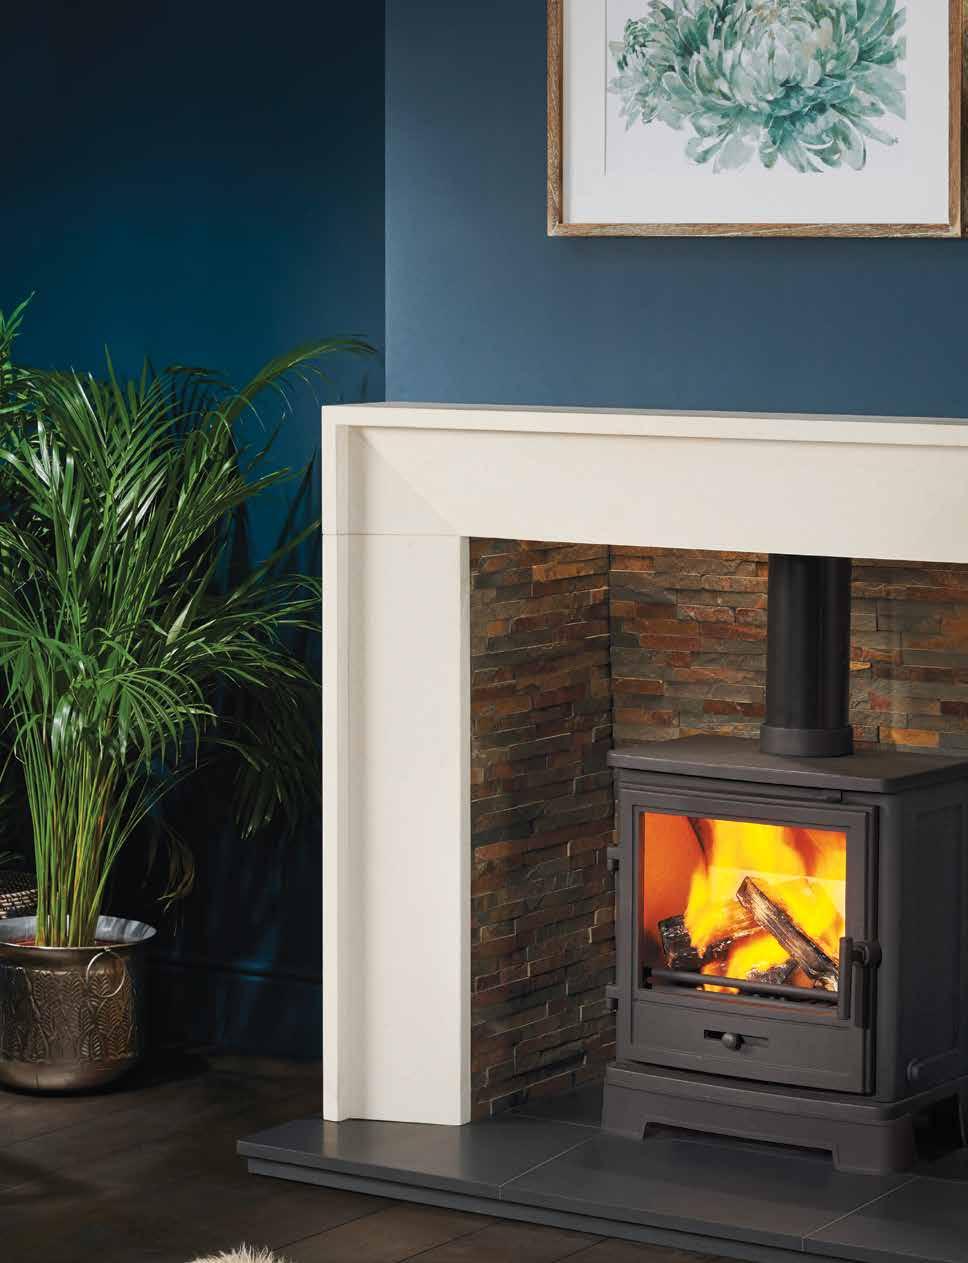 admire our fireplaces Capital Fireplaces was established over 28 years ago to manufacture and supply high quality, elegant and affordable fireplaces crafted